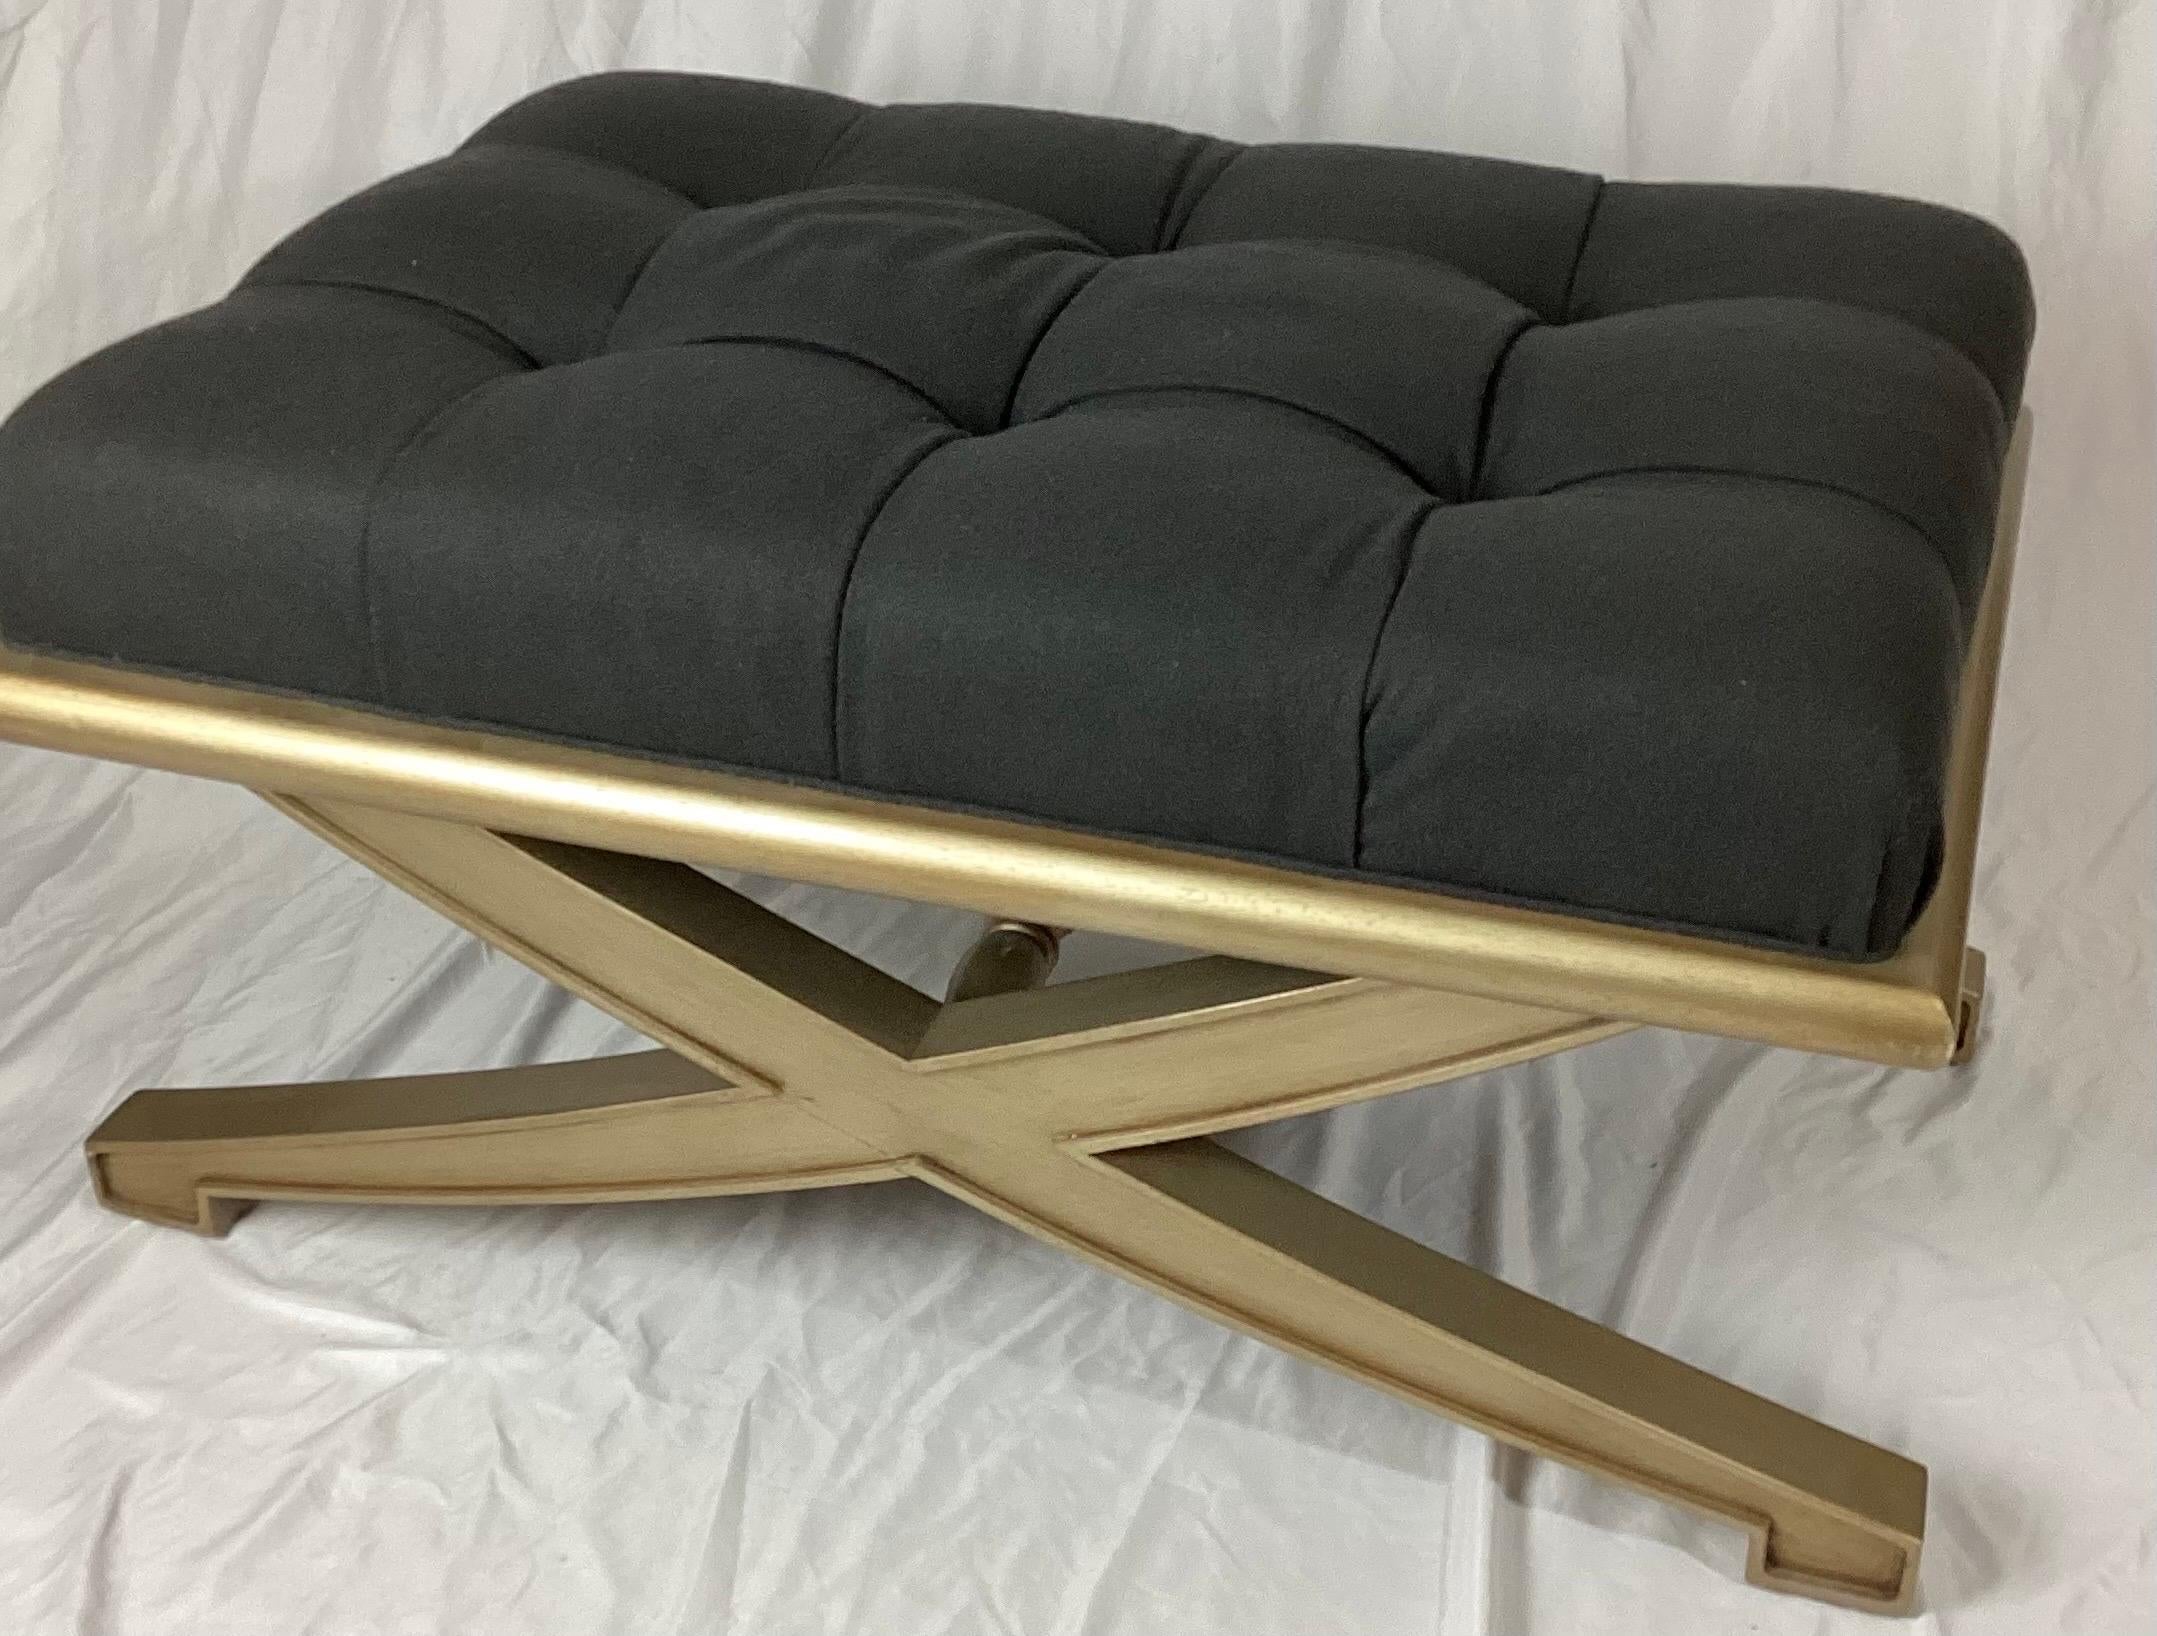 Vanguard Lytton Ottoman with Gray Flannel Tufted Seat & Metallic Gold Base In Excellent Condition For Sale In Lambertville, NJ